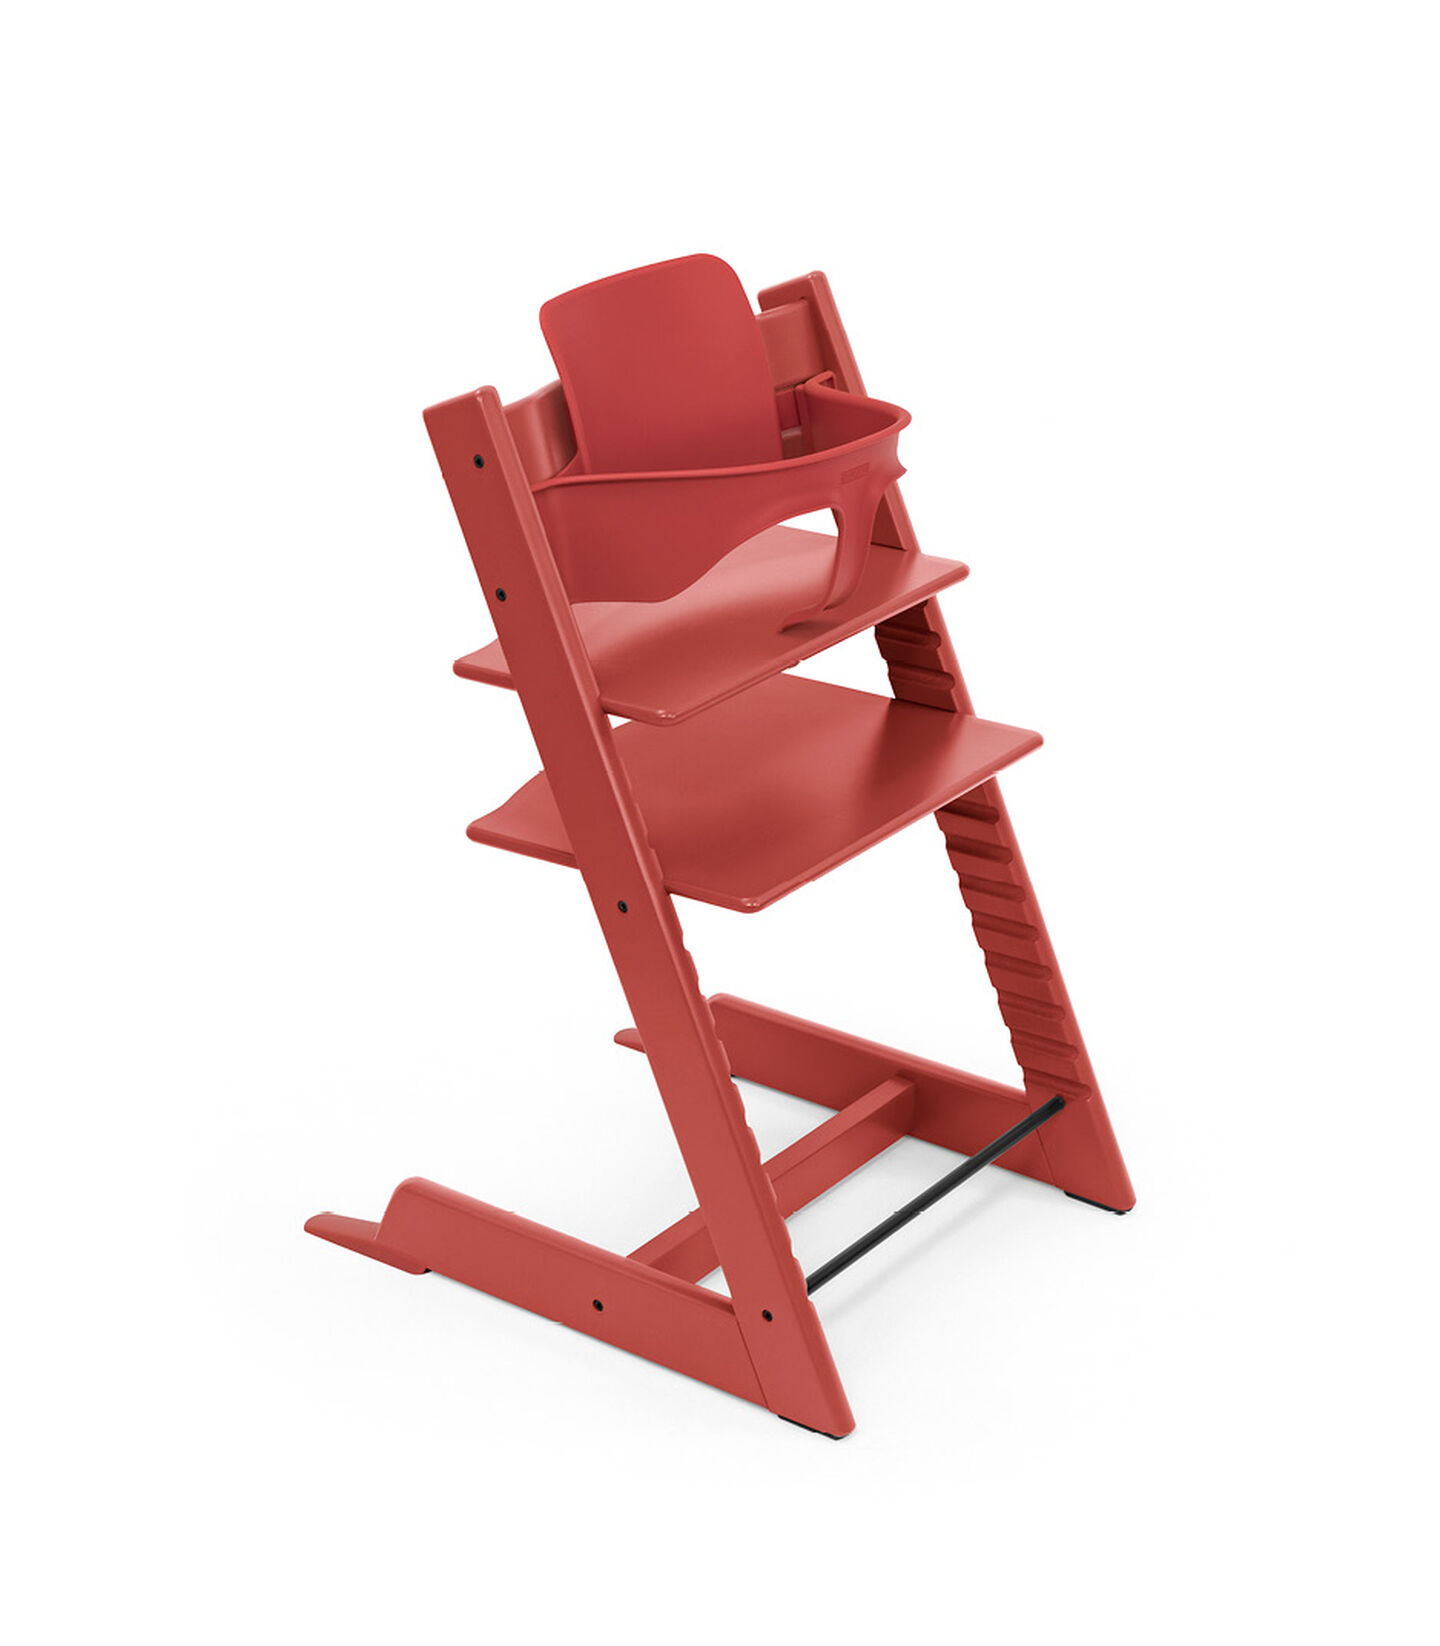 Tripp Trapp® Stol Warm Red, Warm Red, mainview view 4